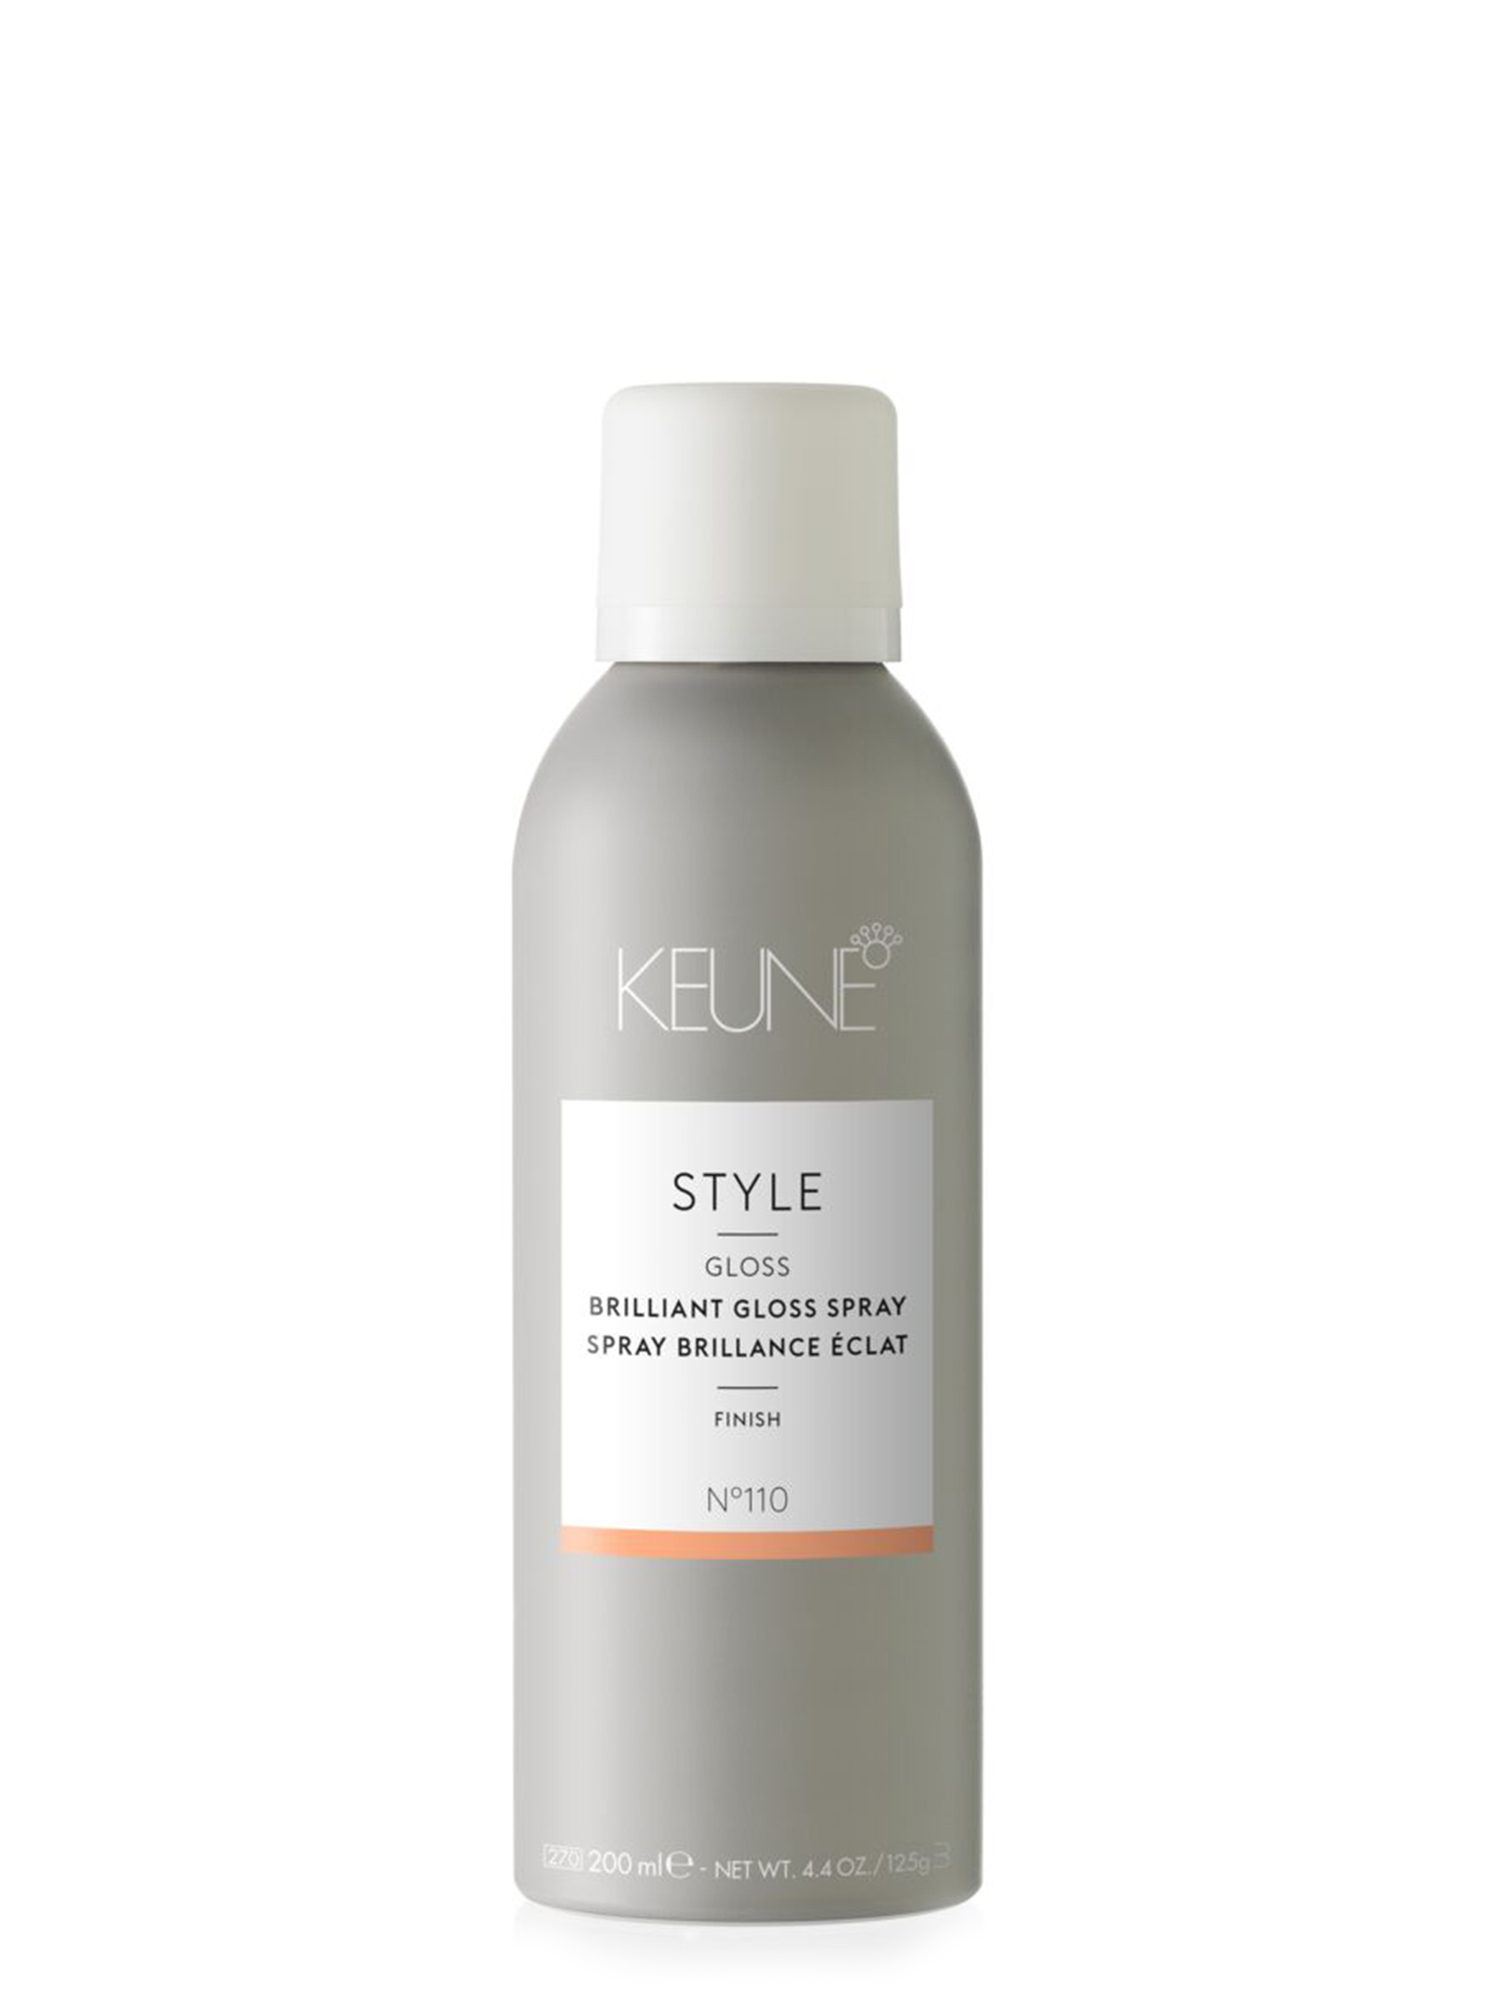 STYLE BRILLIANT GLOSS SPRAY: Our anti-frizz secret for intense shine. Lightweight finishing spray without weighing down your hair. Discover it now on keune.ch!